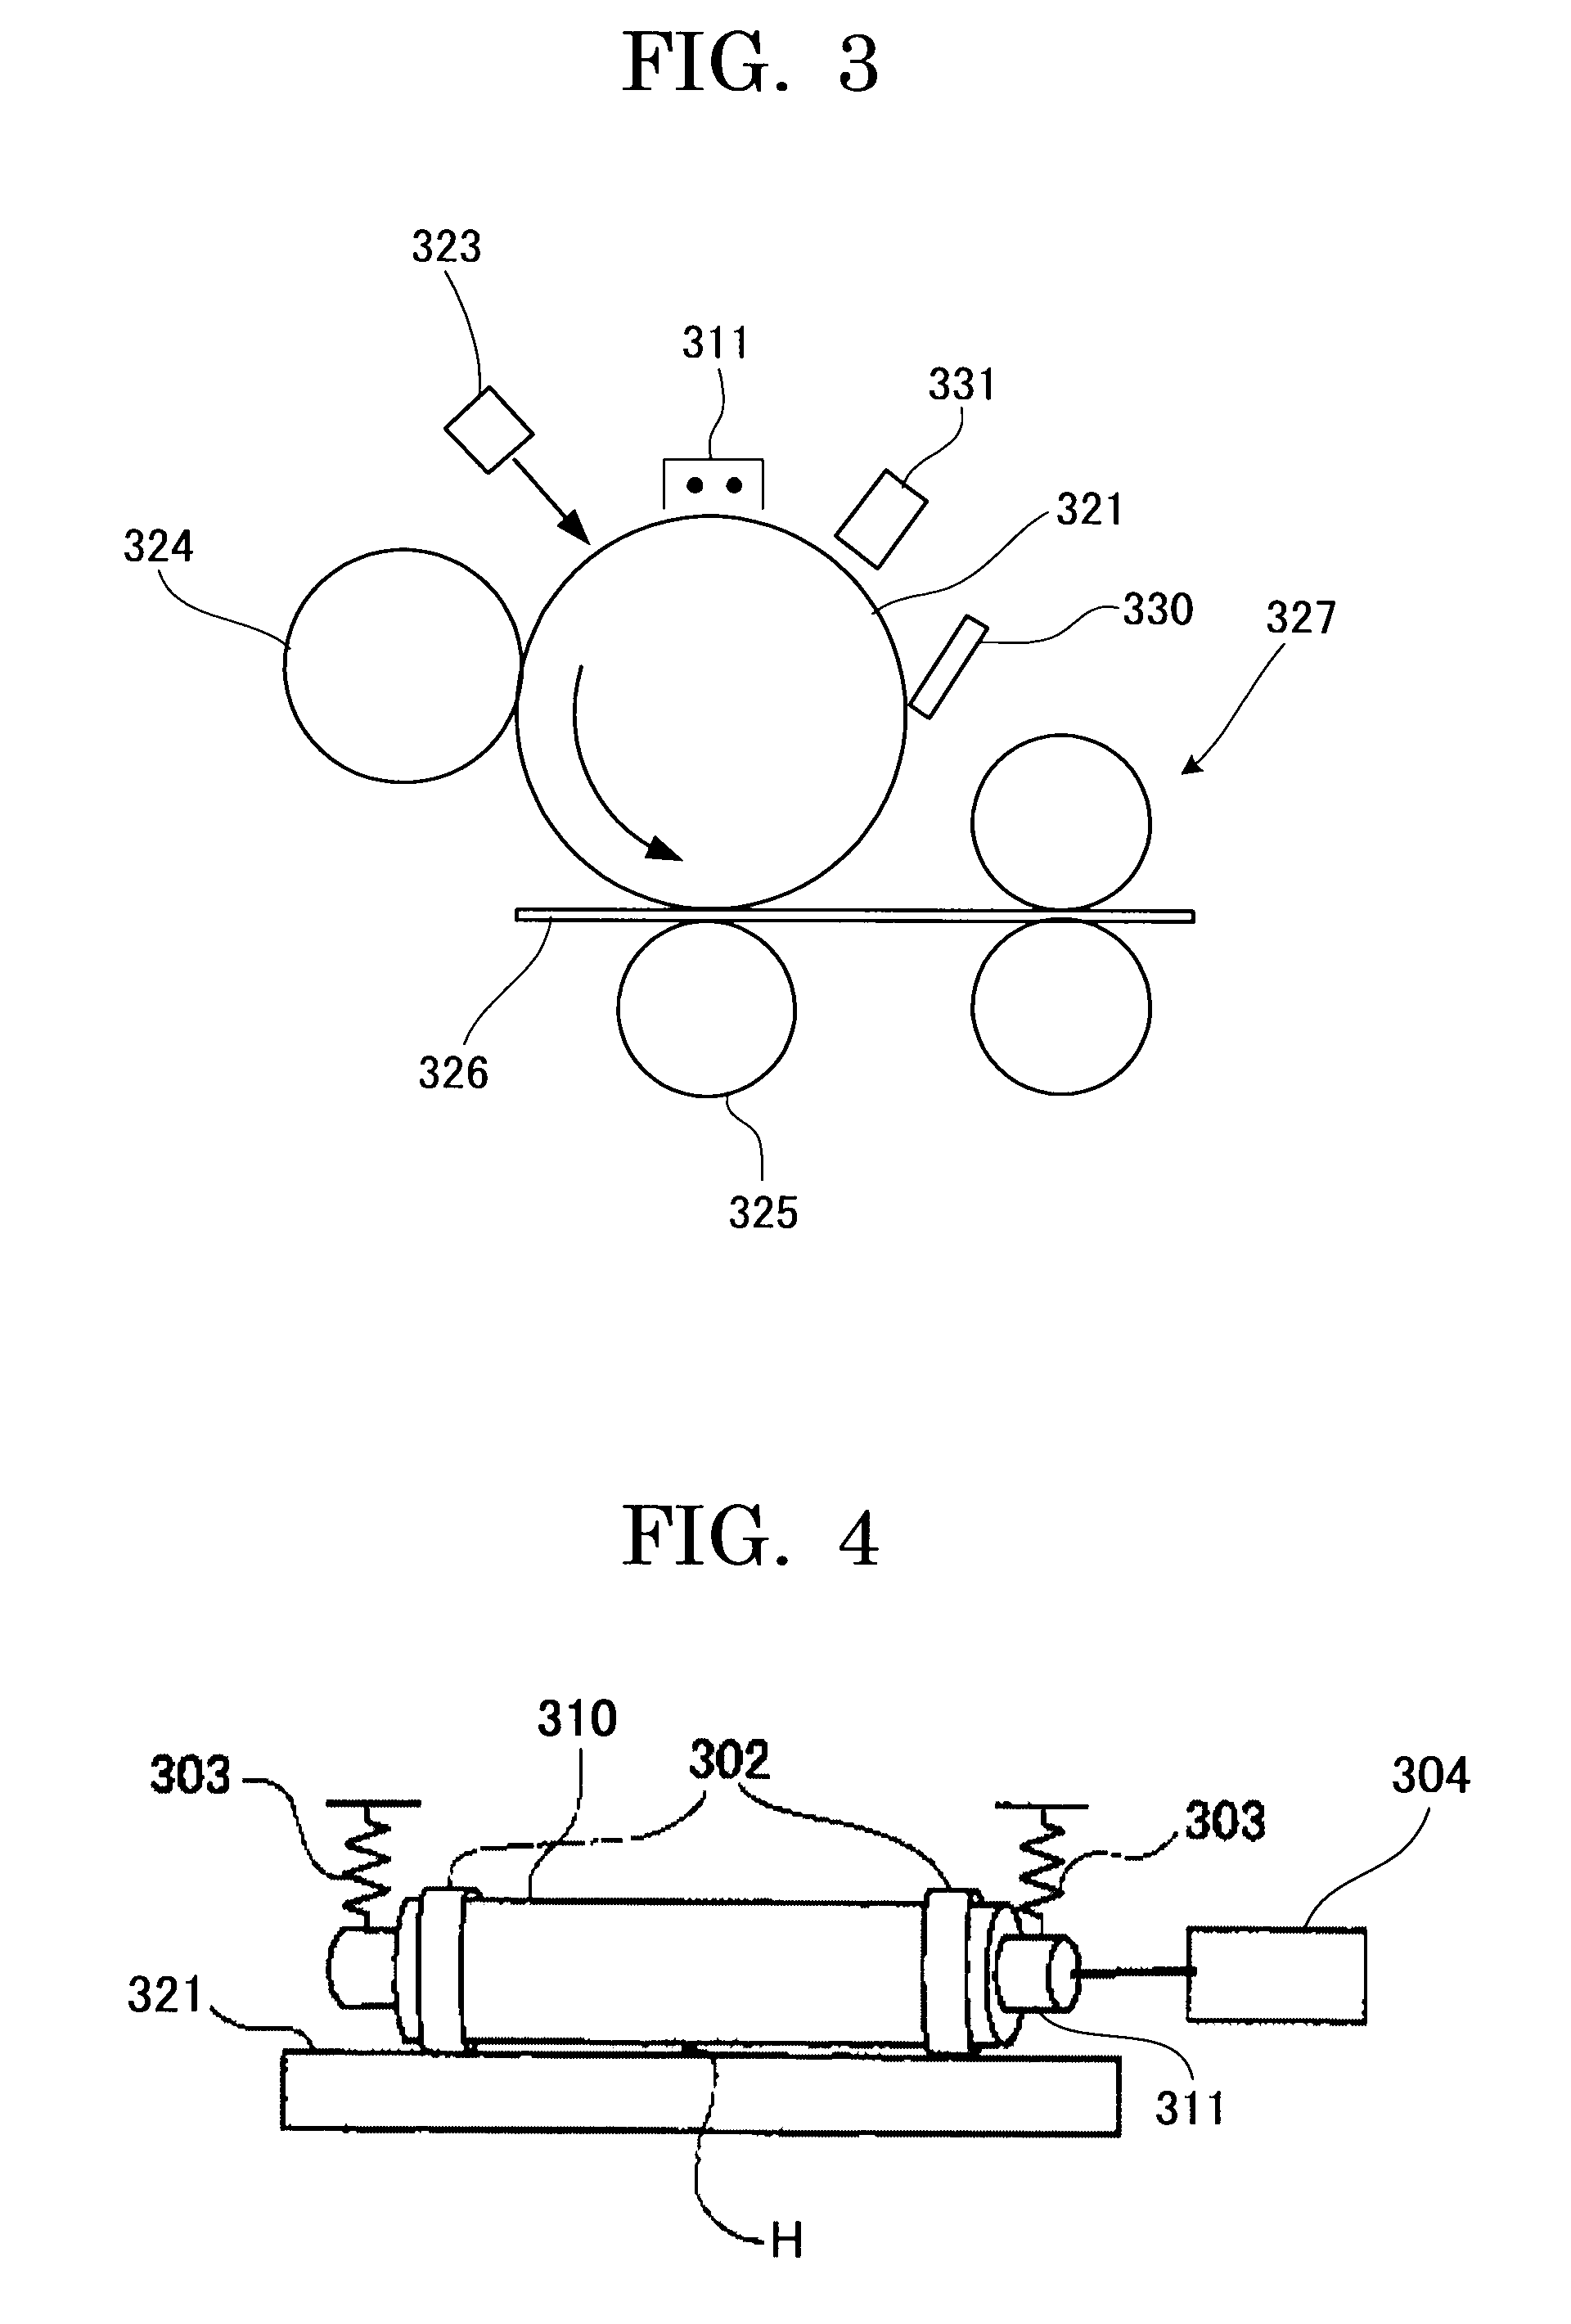 Toner, image forming apparatus, image forming method, and process cartridge using the toner